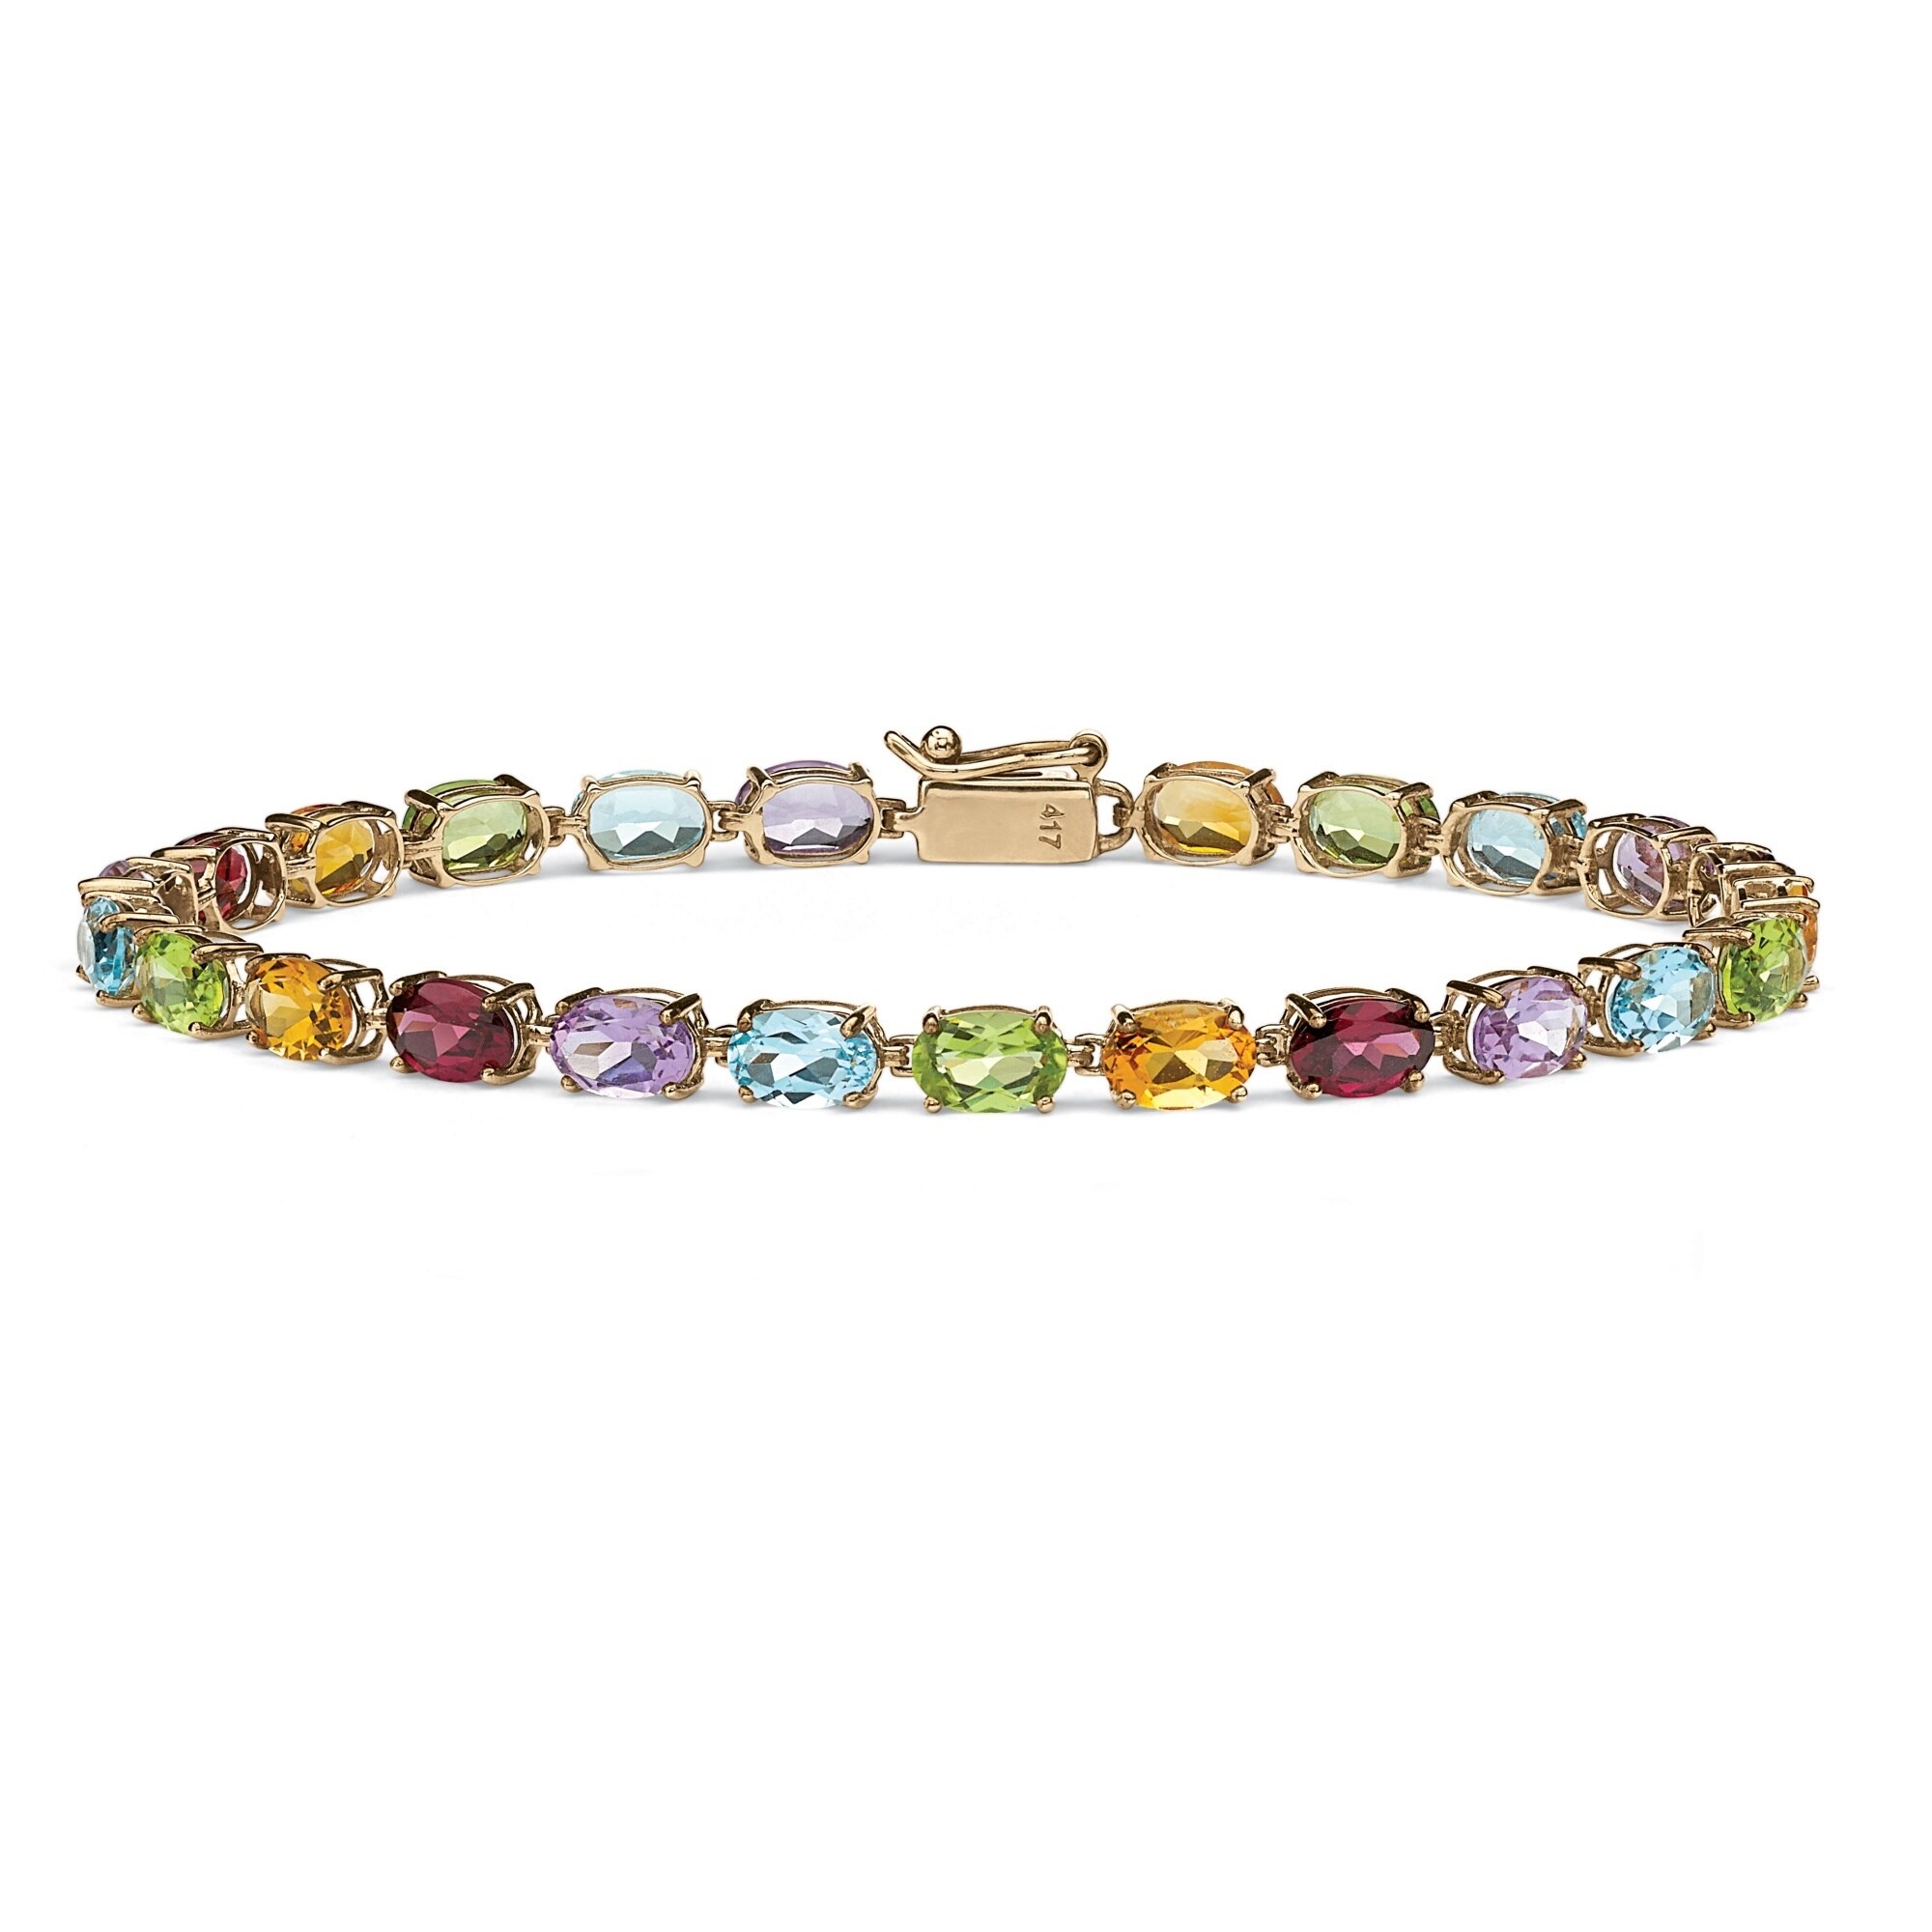 14K Yellow Gold Bracelet With Round Multi-Color Gemstones 7 Inches